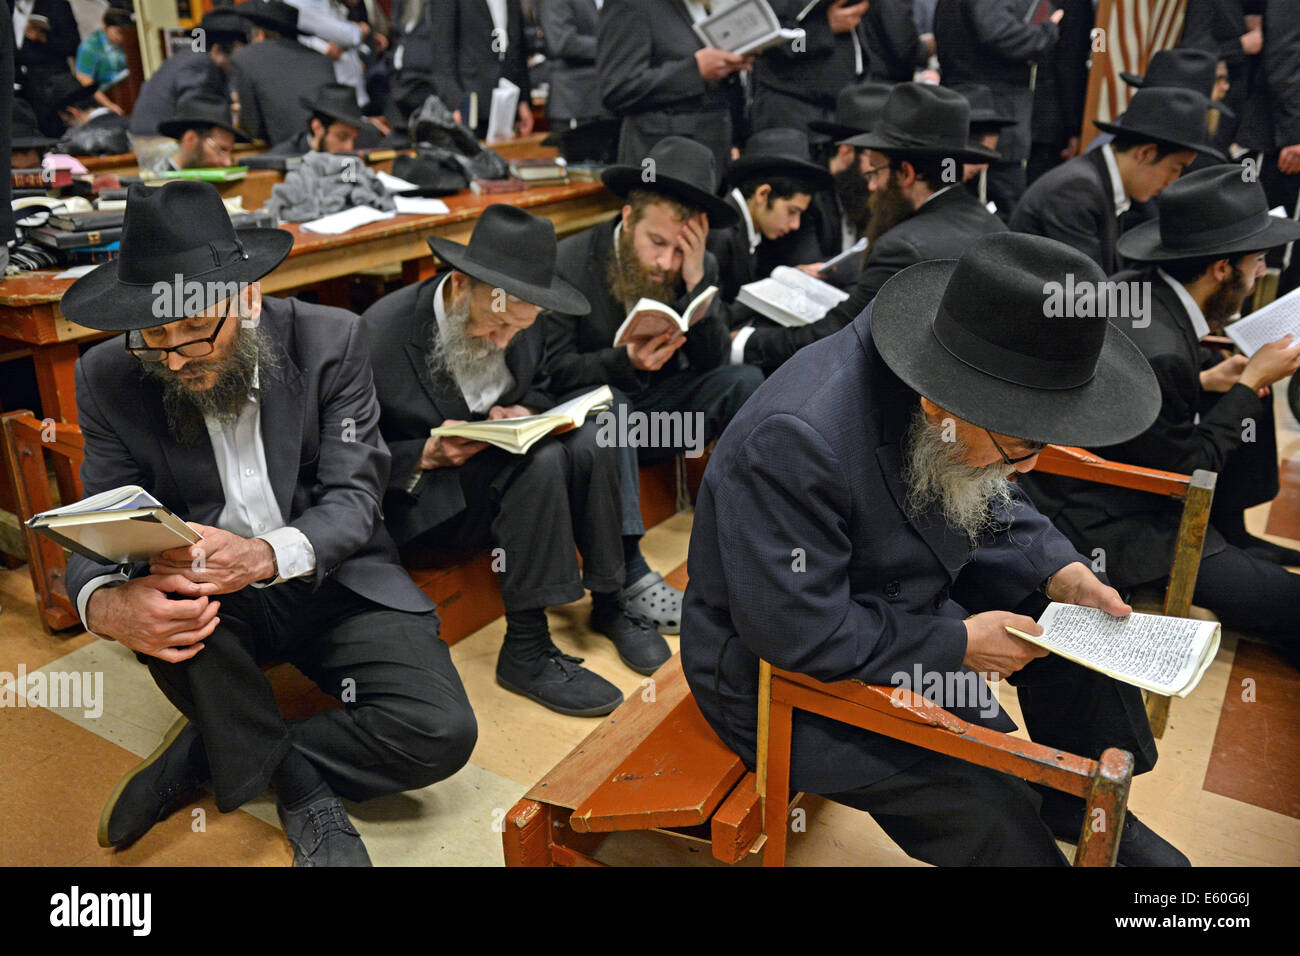 Jewish men praying on Tisha B'Av and following the tradition of sitting in low seats. At a synagogue in Brooklyn, New York. Stock Photo